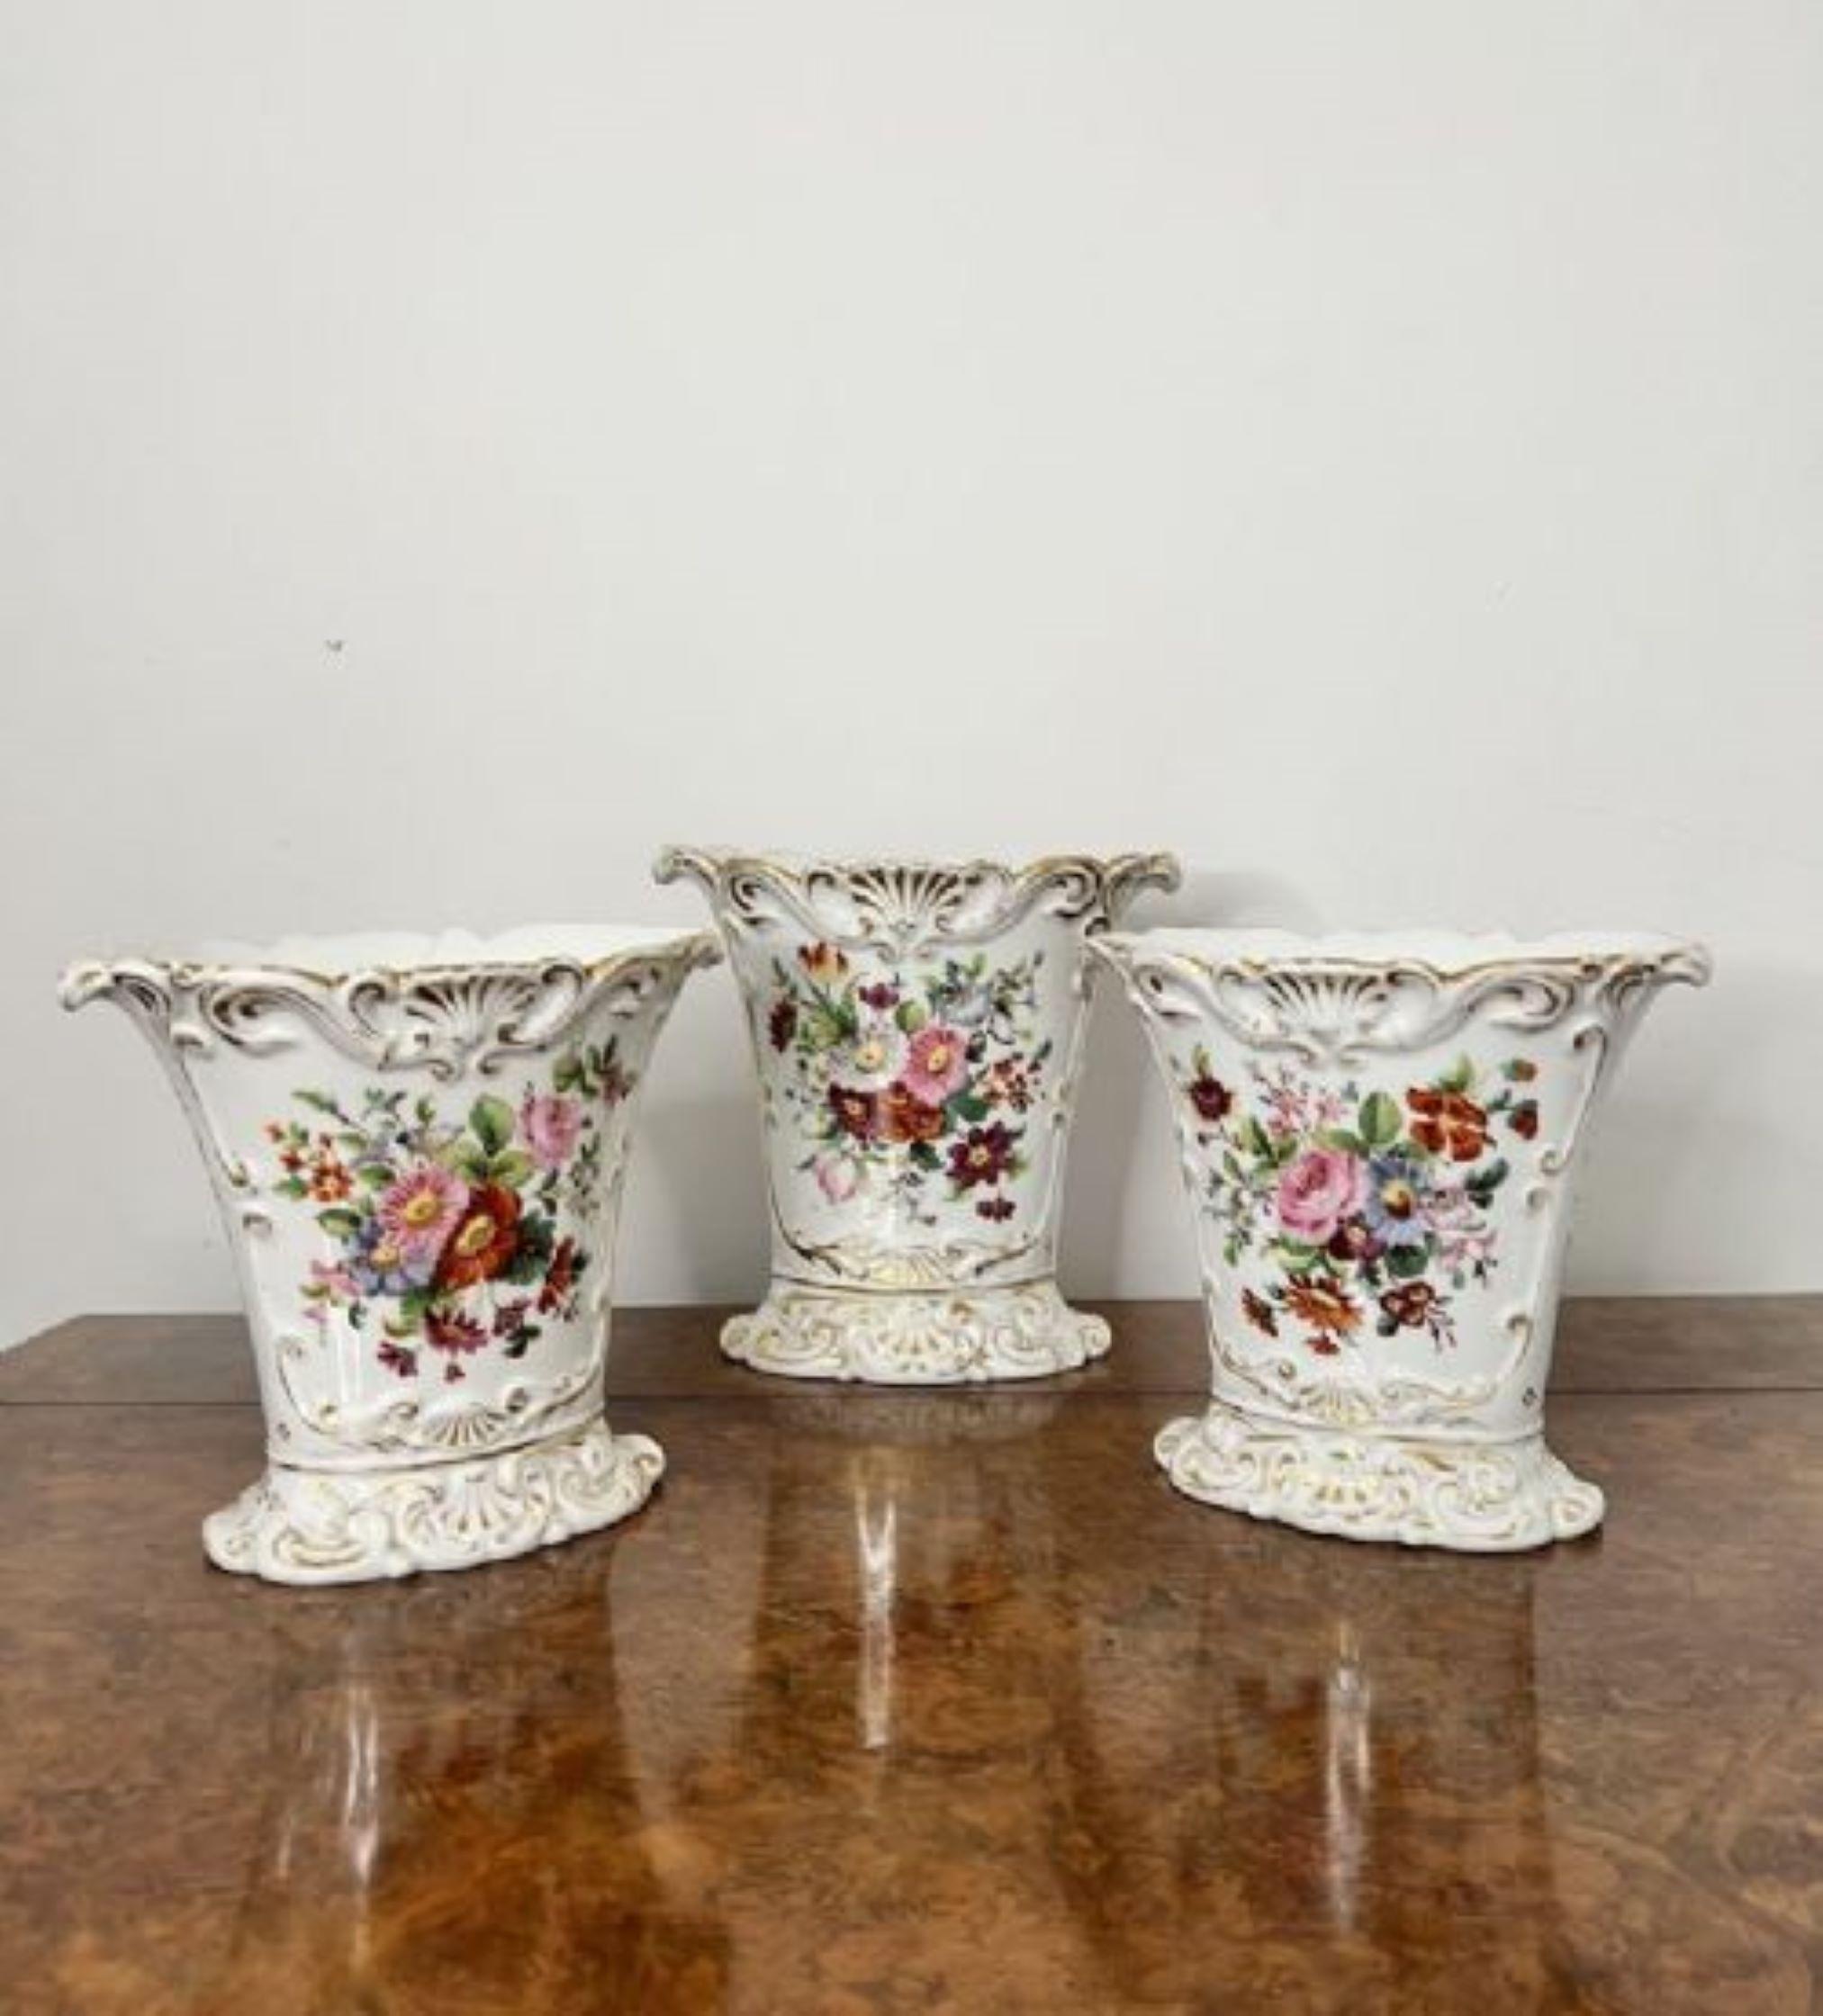 Fantastic quality garniture of three 19th century French vases having a fantastic garniture of three French vases, with fluted shaped bodies with floral decoration in fabulous blue, pink, green and orange colours surrounded by gold gilding standing